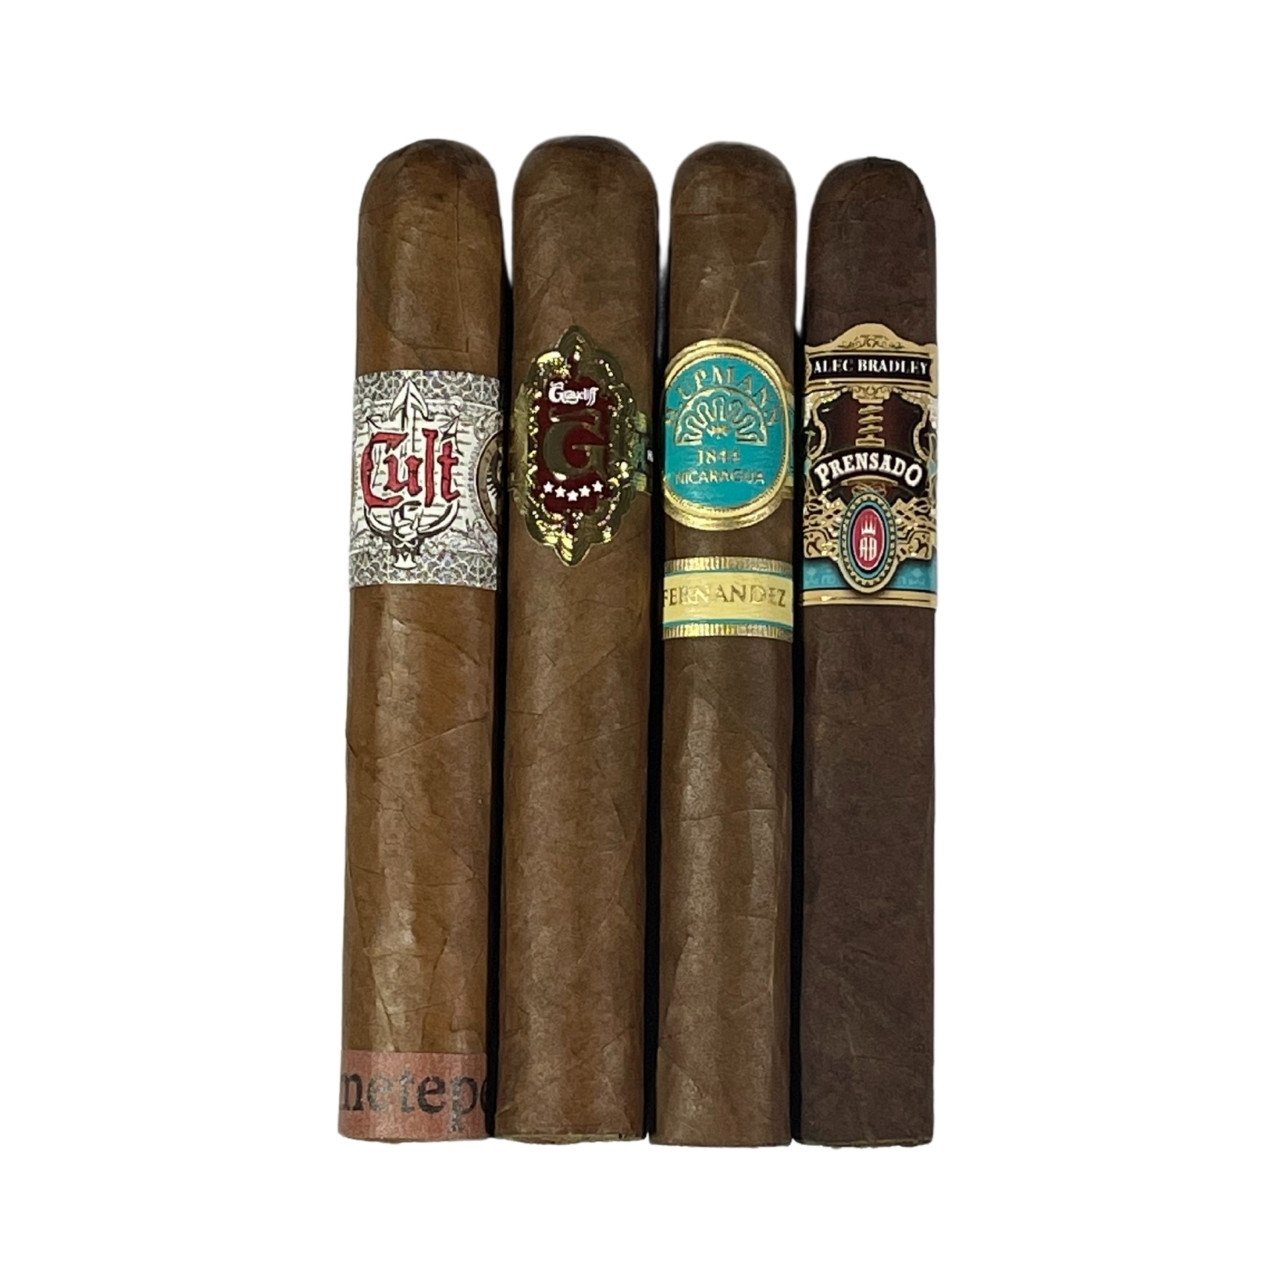 All big ring cigars just for you! Free shipping on this beefy selection. The value is too good not to jump on!!!